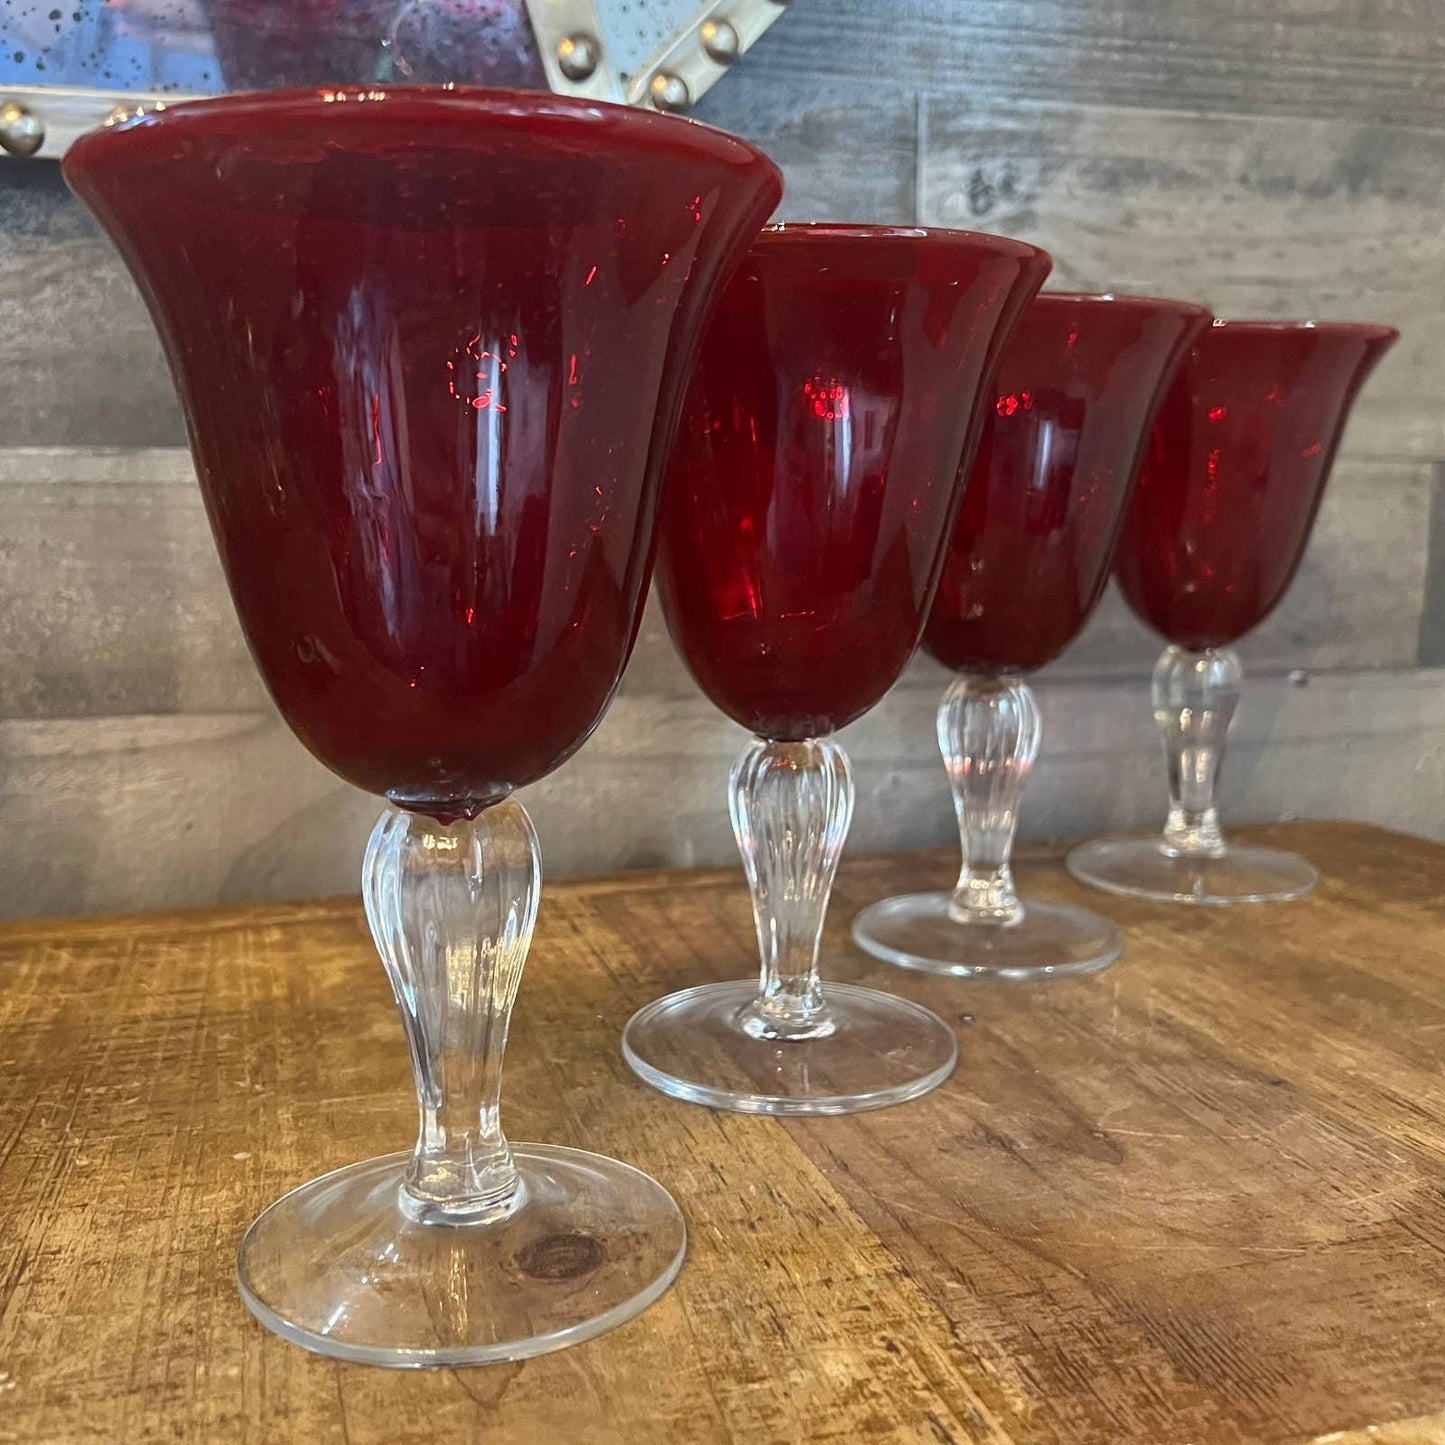 Set of 2 Vintage Wine Glasses - Goblets. Gorgeous Red with Clear stems